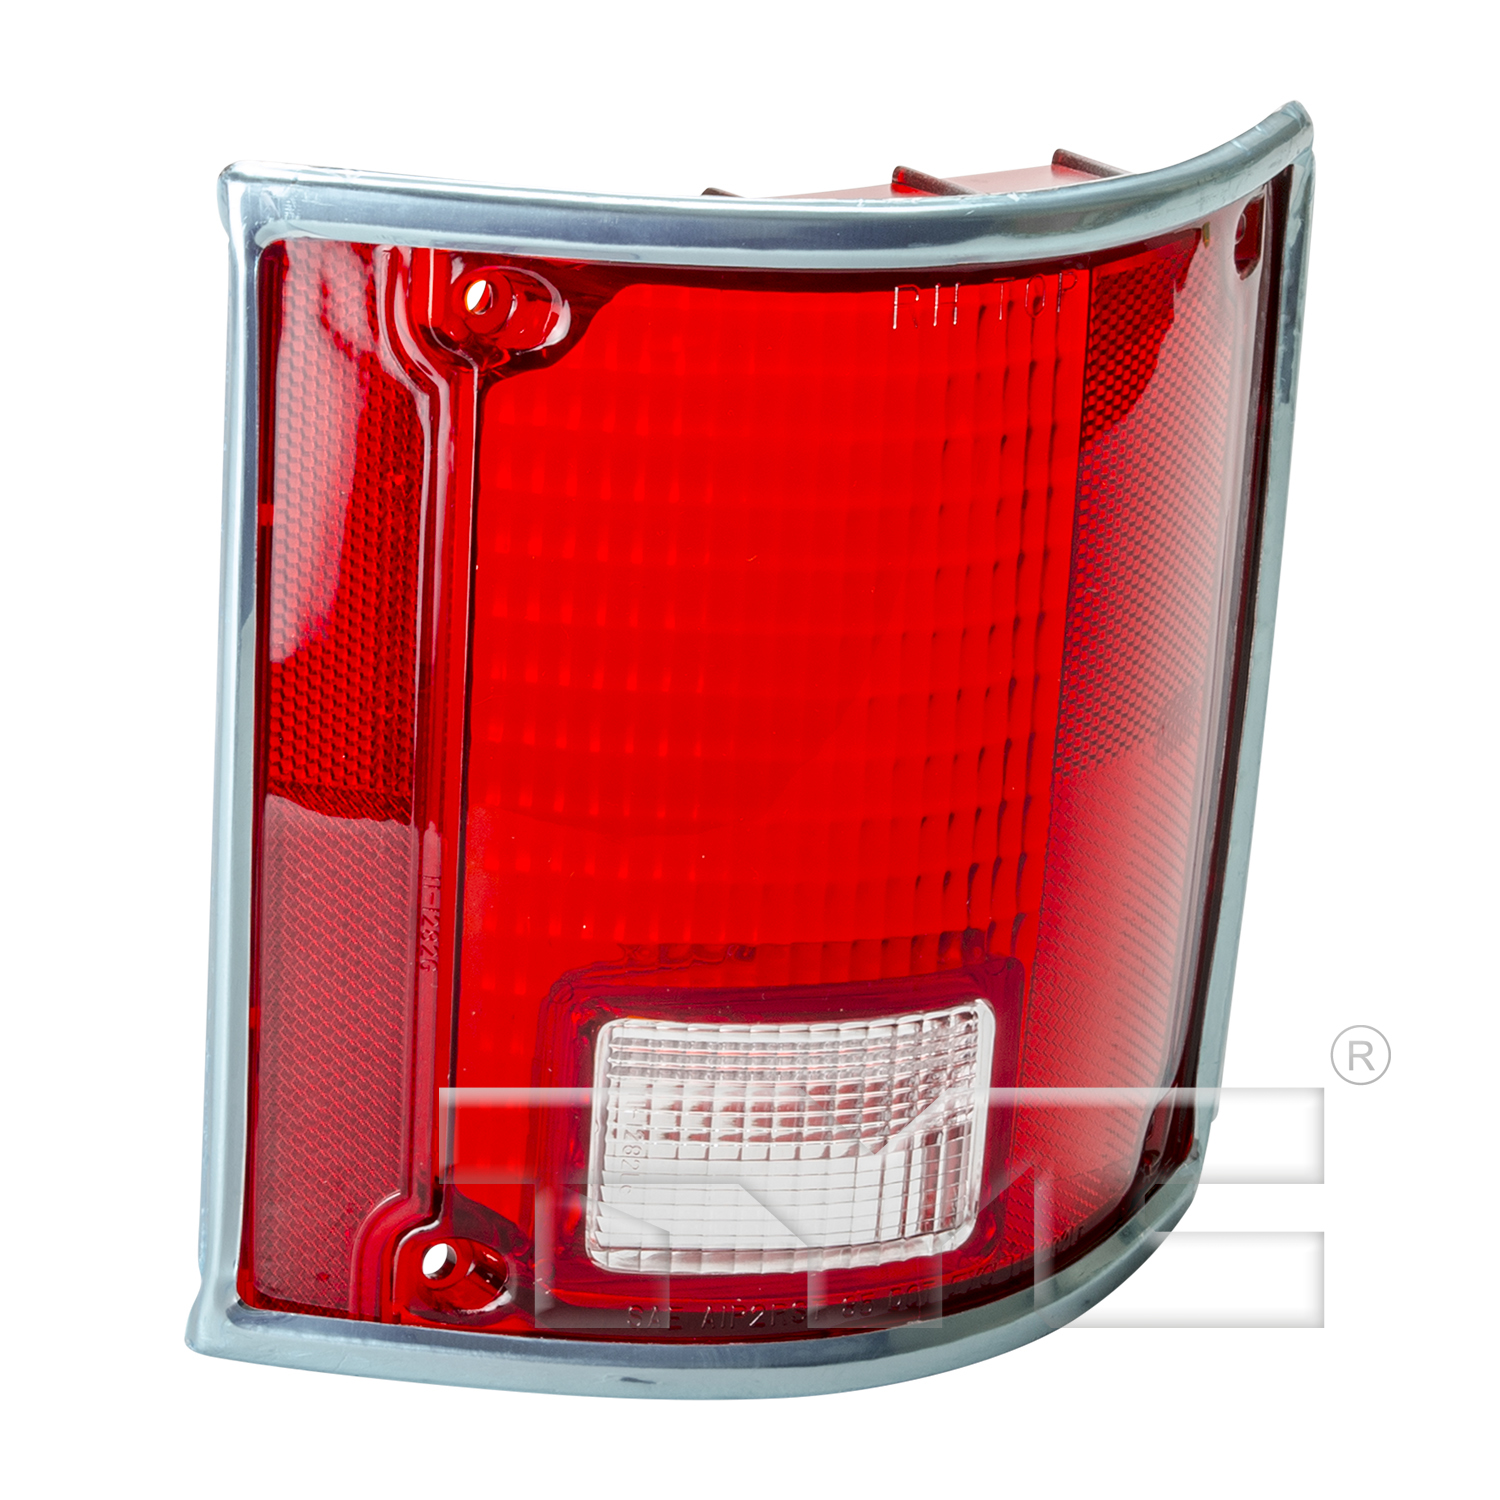 Aftermarket TAILLIGHTS for GMC - C1500, C1500,79-87,RT Taillamp lens